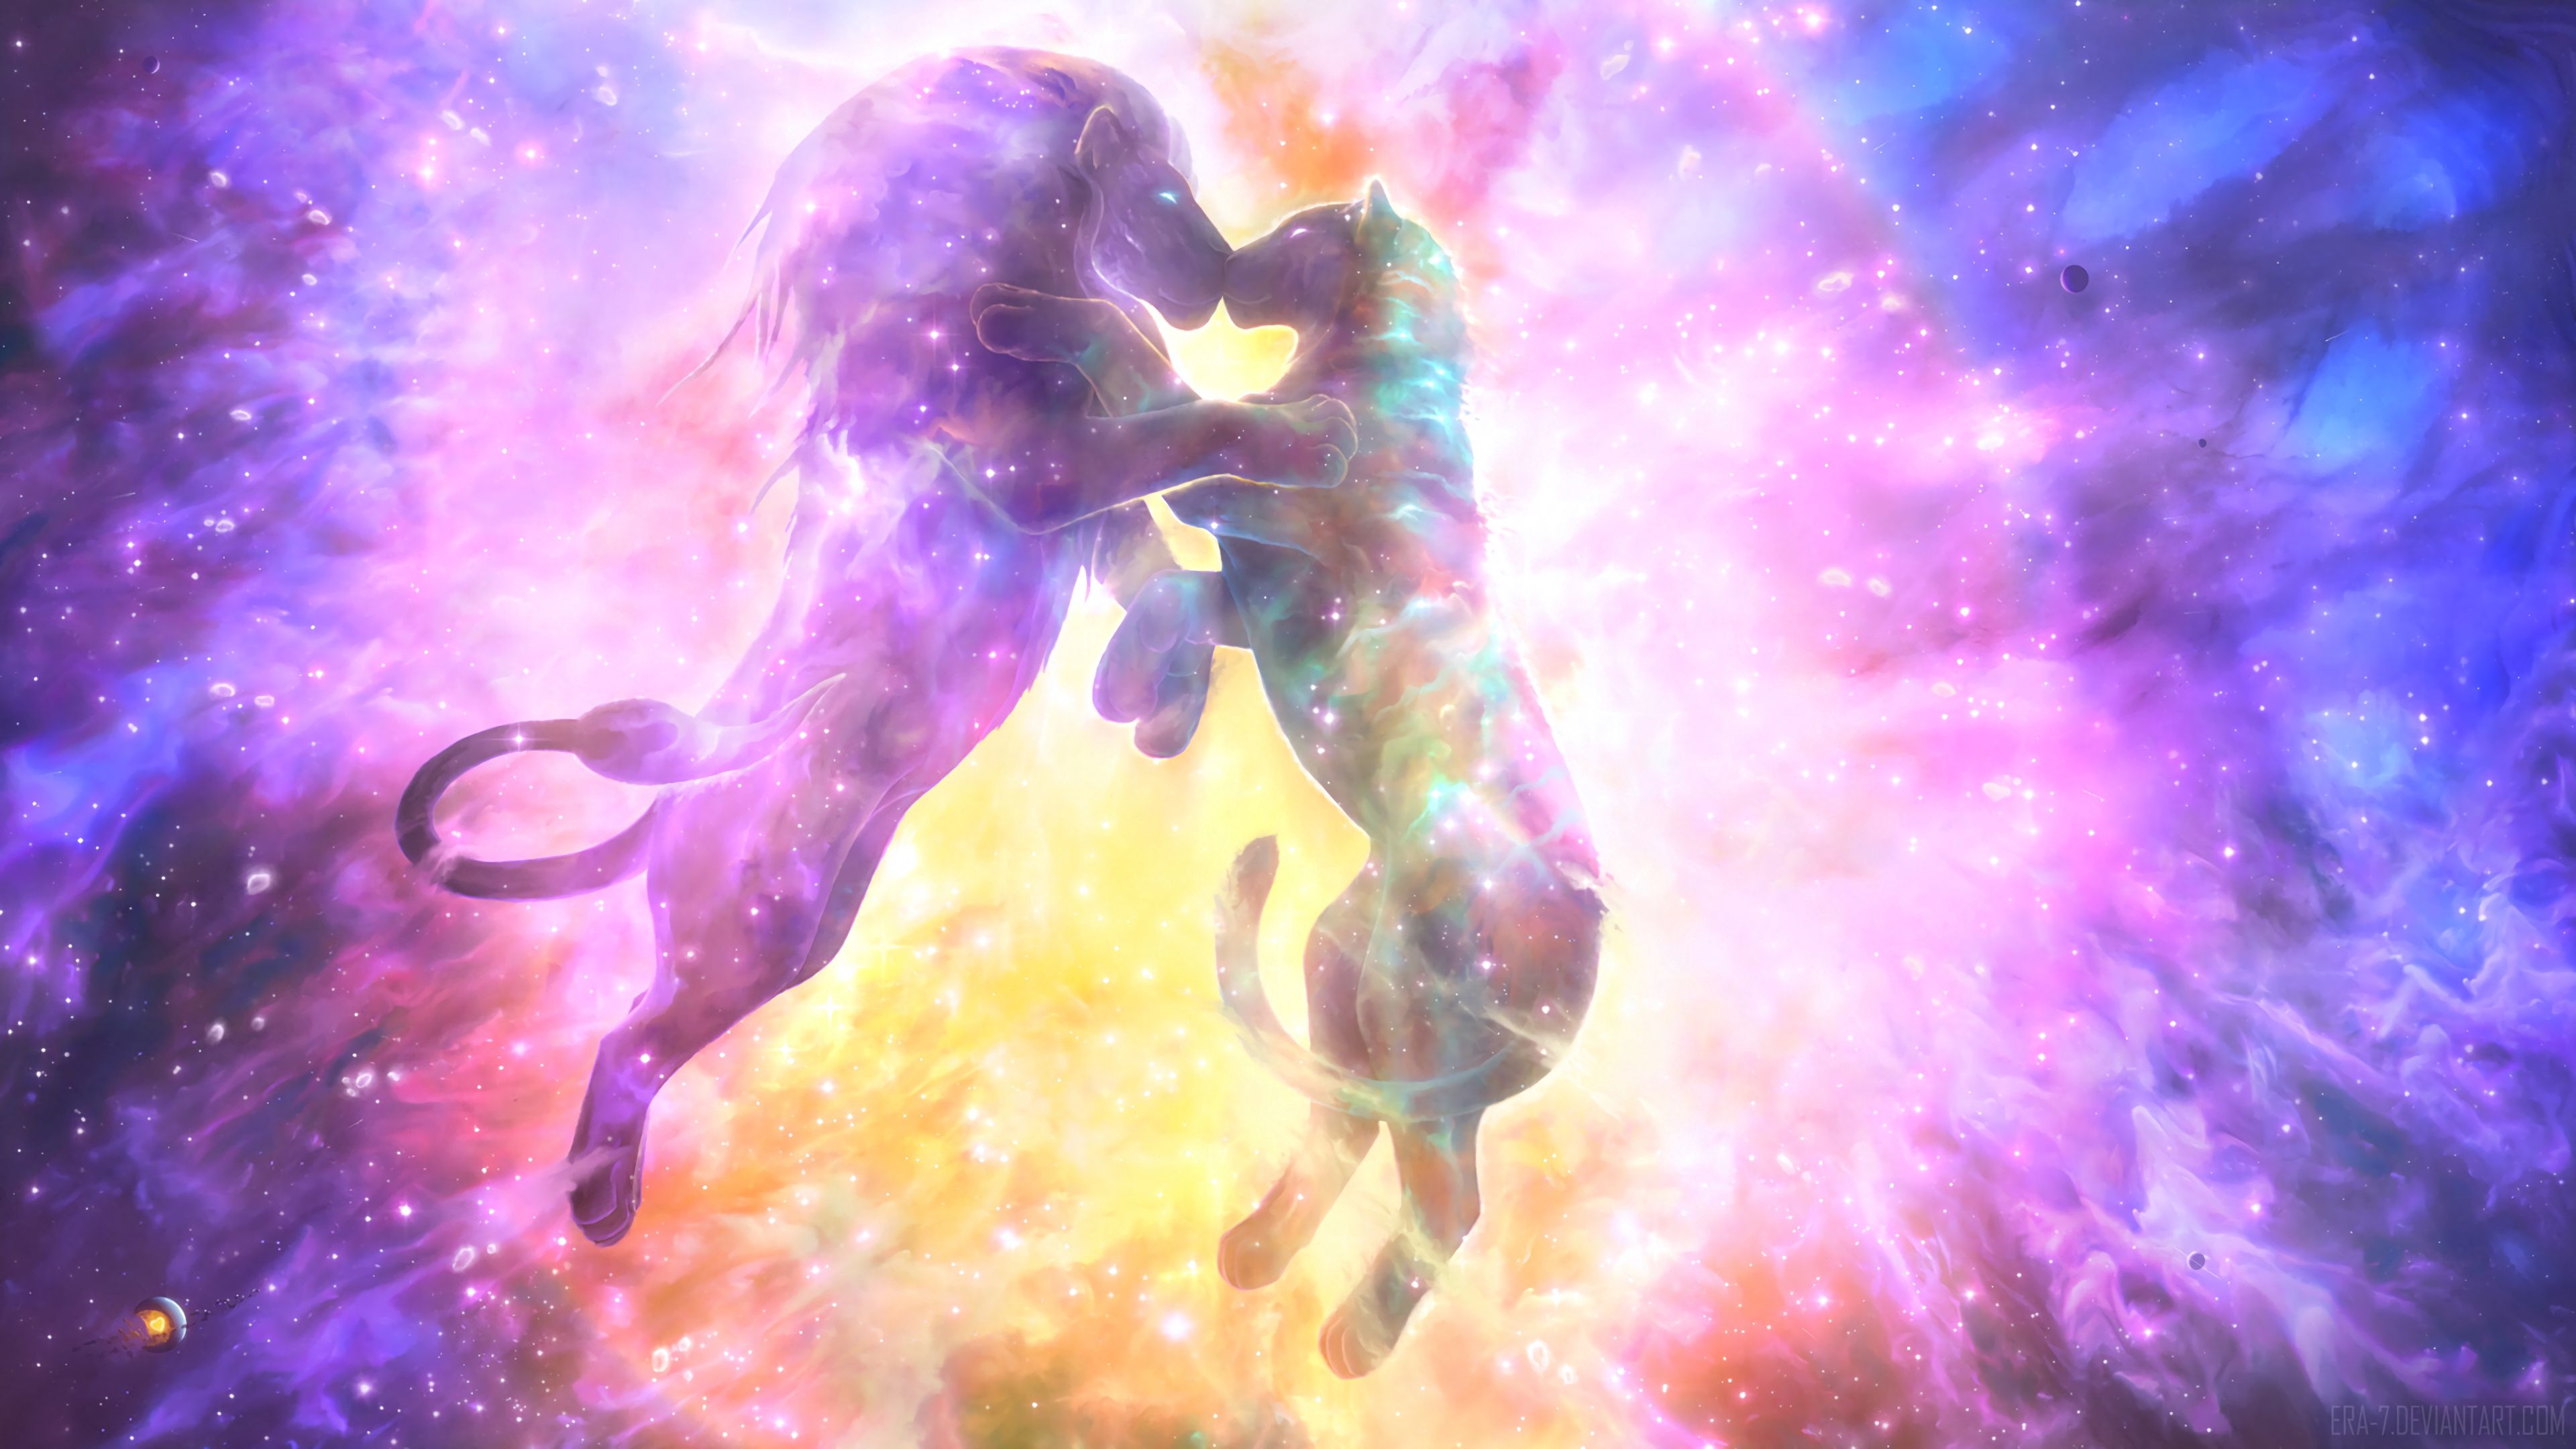 79360 download wallpaper art, universe, silhouettes, starry sky, lion, lioness, kiss screensavers and pictures for free